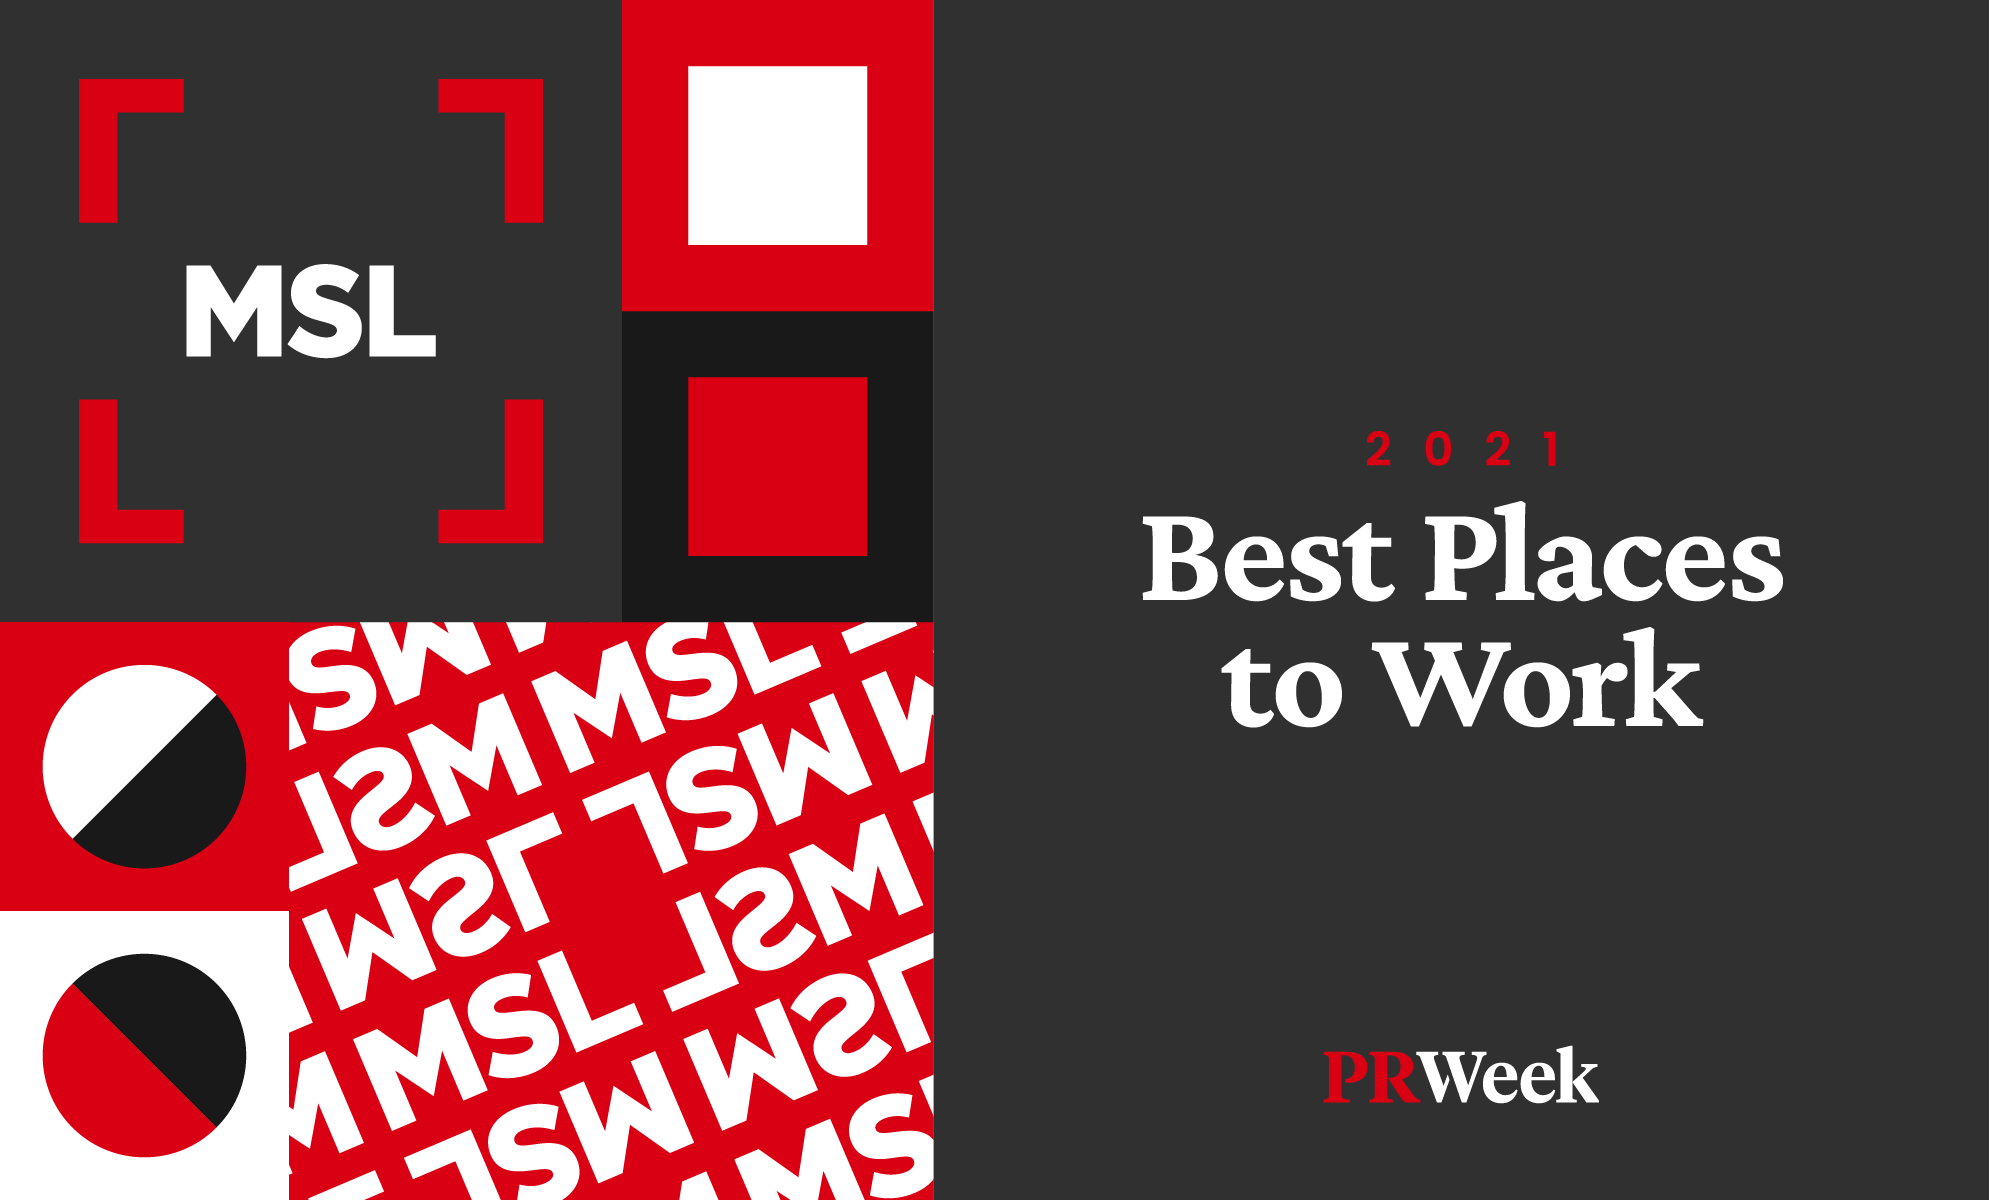 2021 Best Places to Work graphic - PRWeek